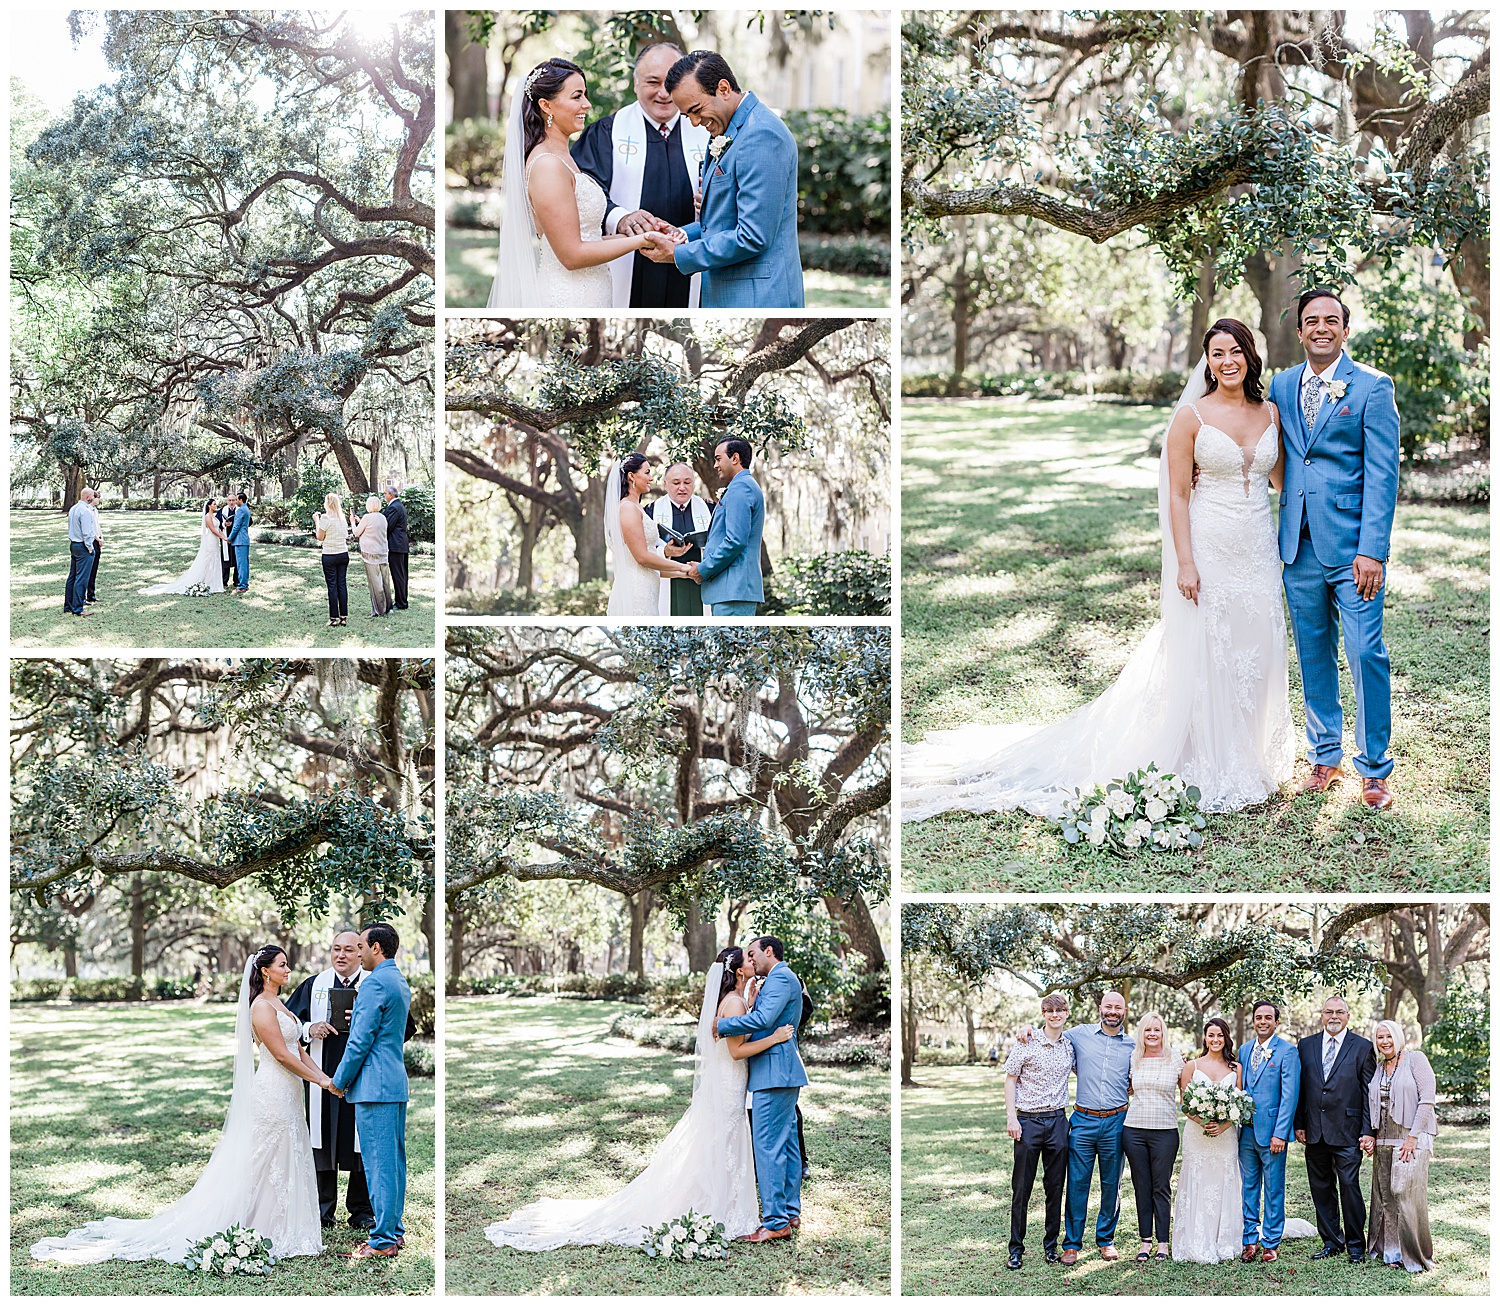 Ceremony at Forsyth Park with the Savannah Elopement Package